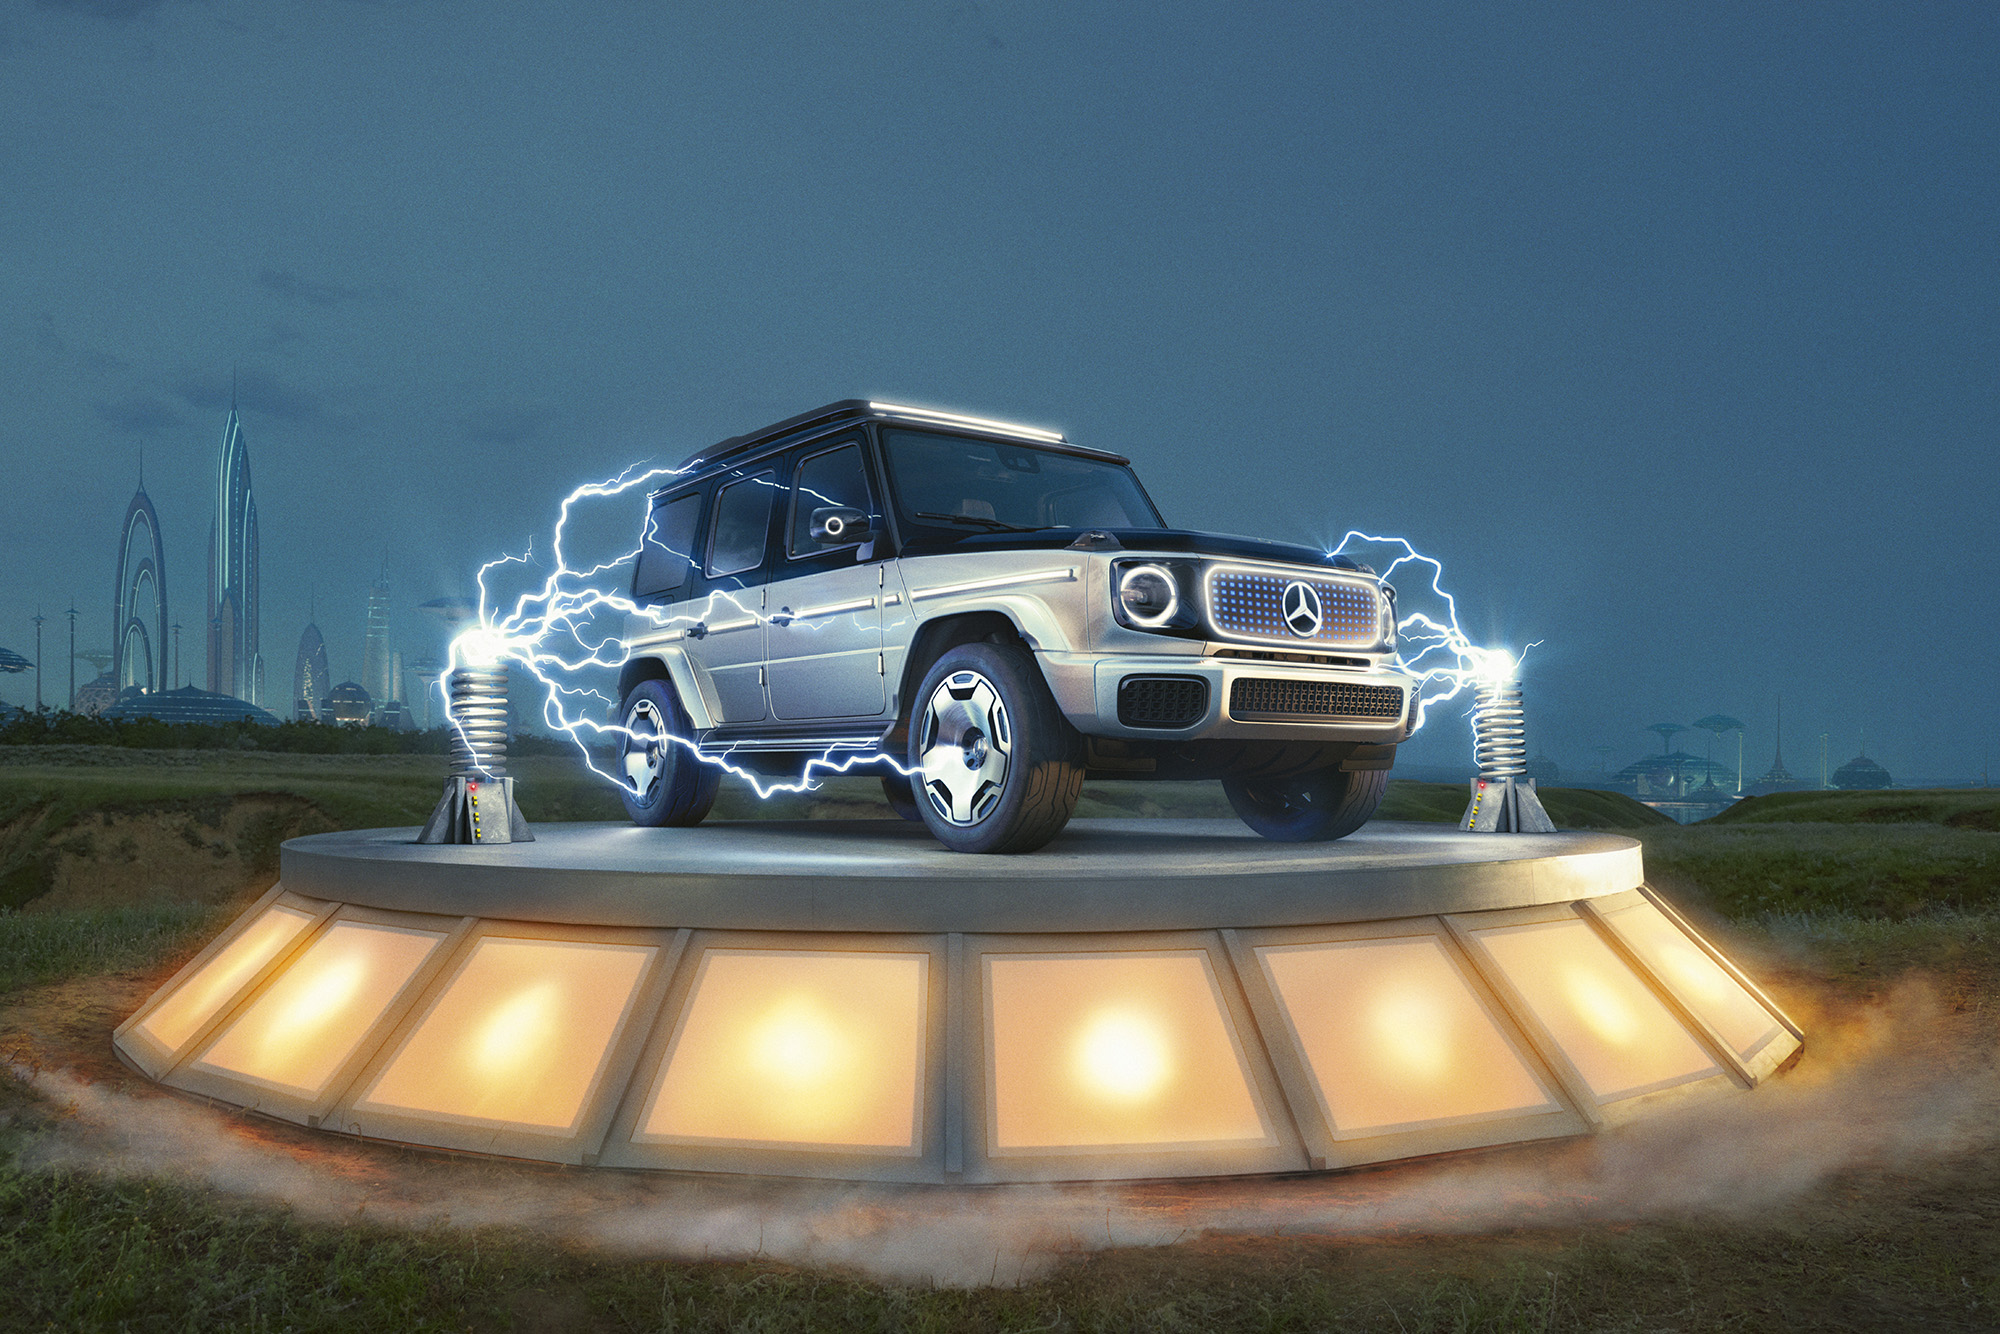 Mercedes-Benz EQG front view. Shot from the ground on elevated circular platform with ground lighting, special effects lightning bolts surround the car